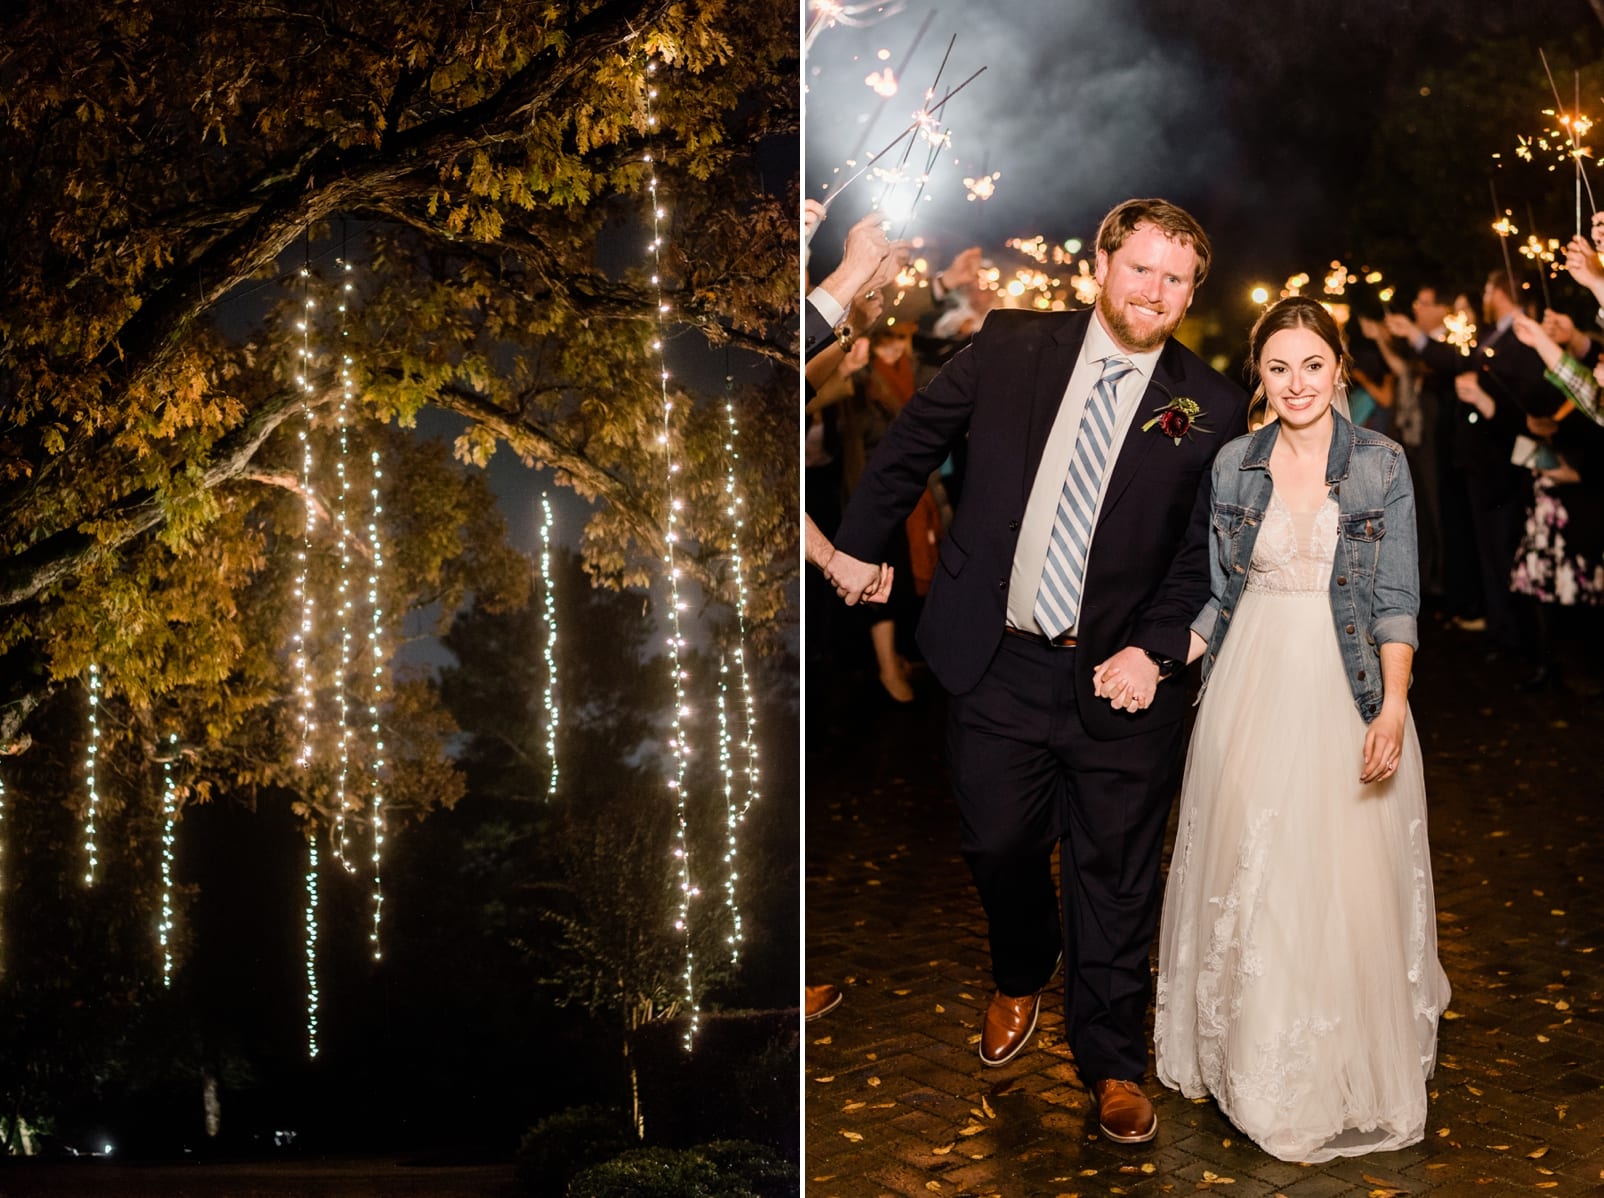 Sutherland Estate sparkler exit with bride and groom photo